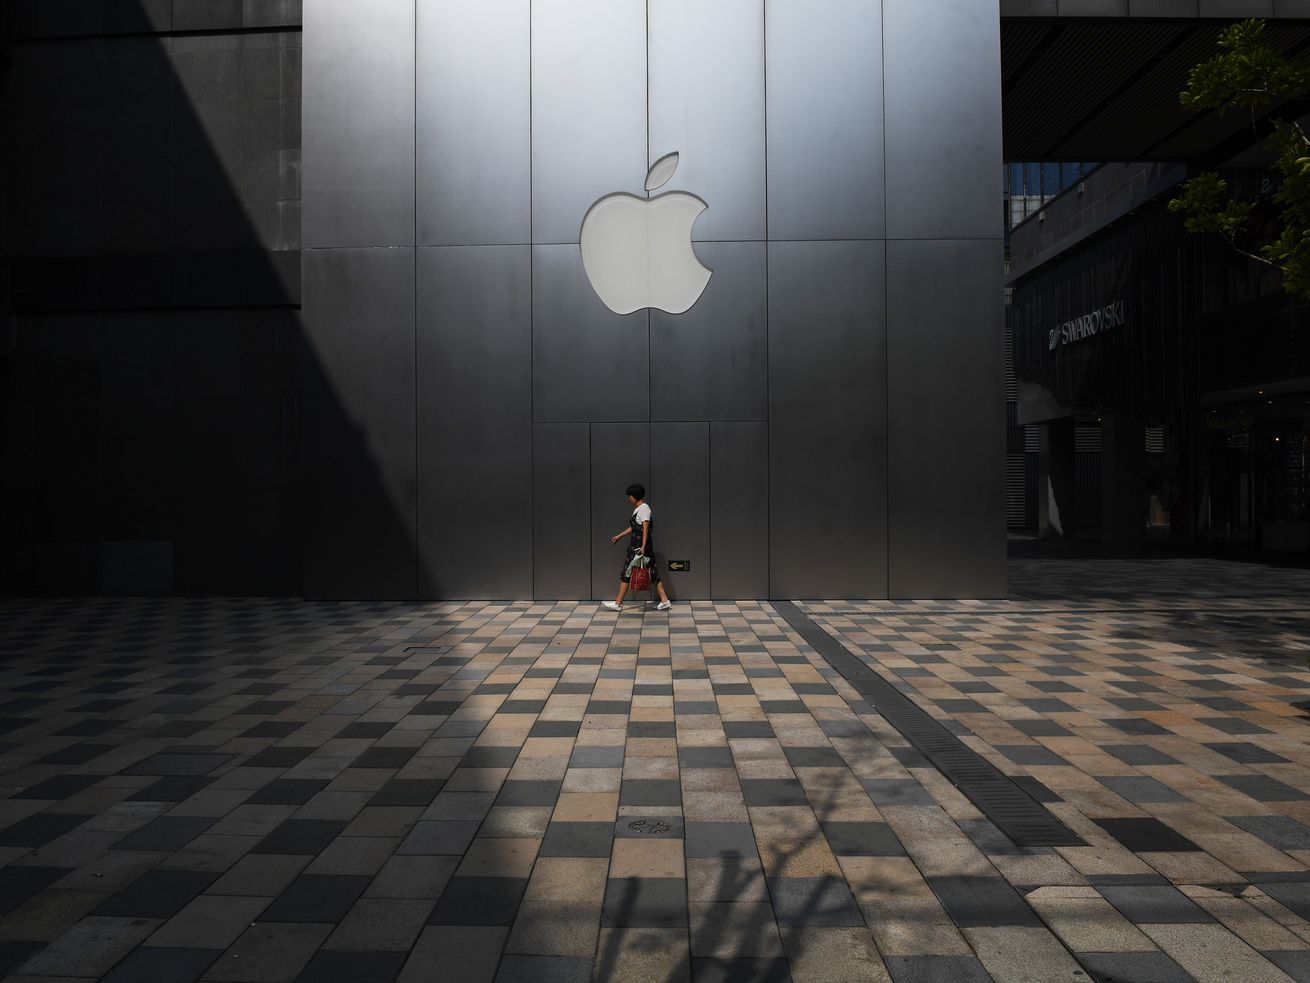 A woman walks past an Apple store in Beijing, China.